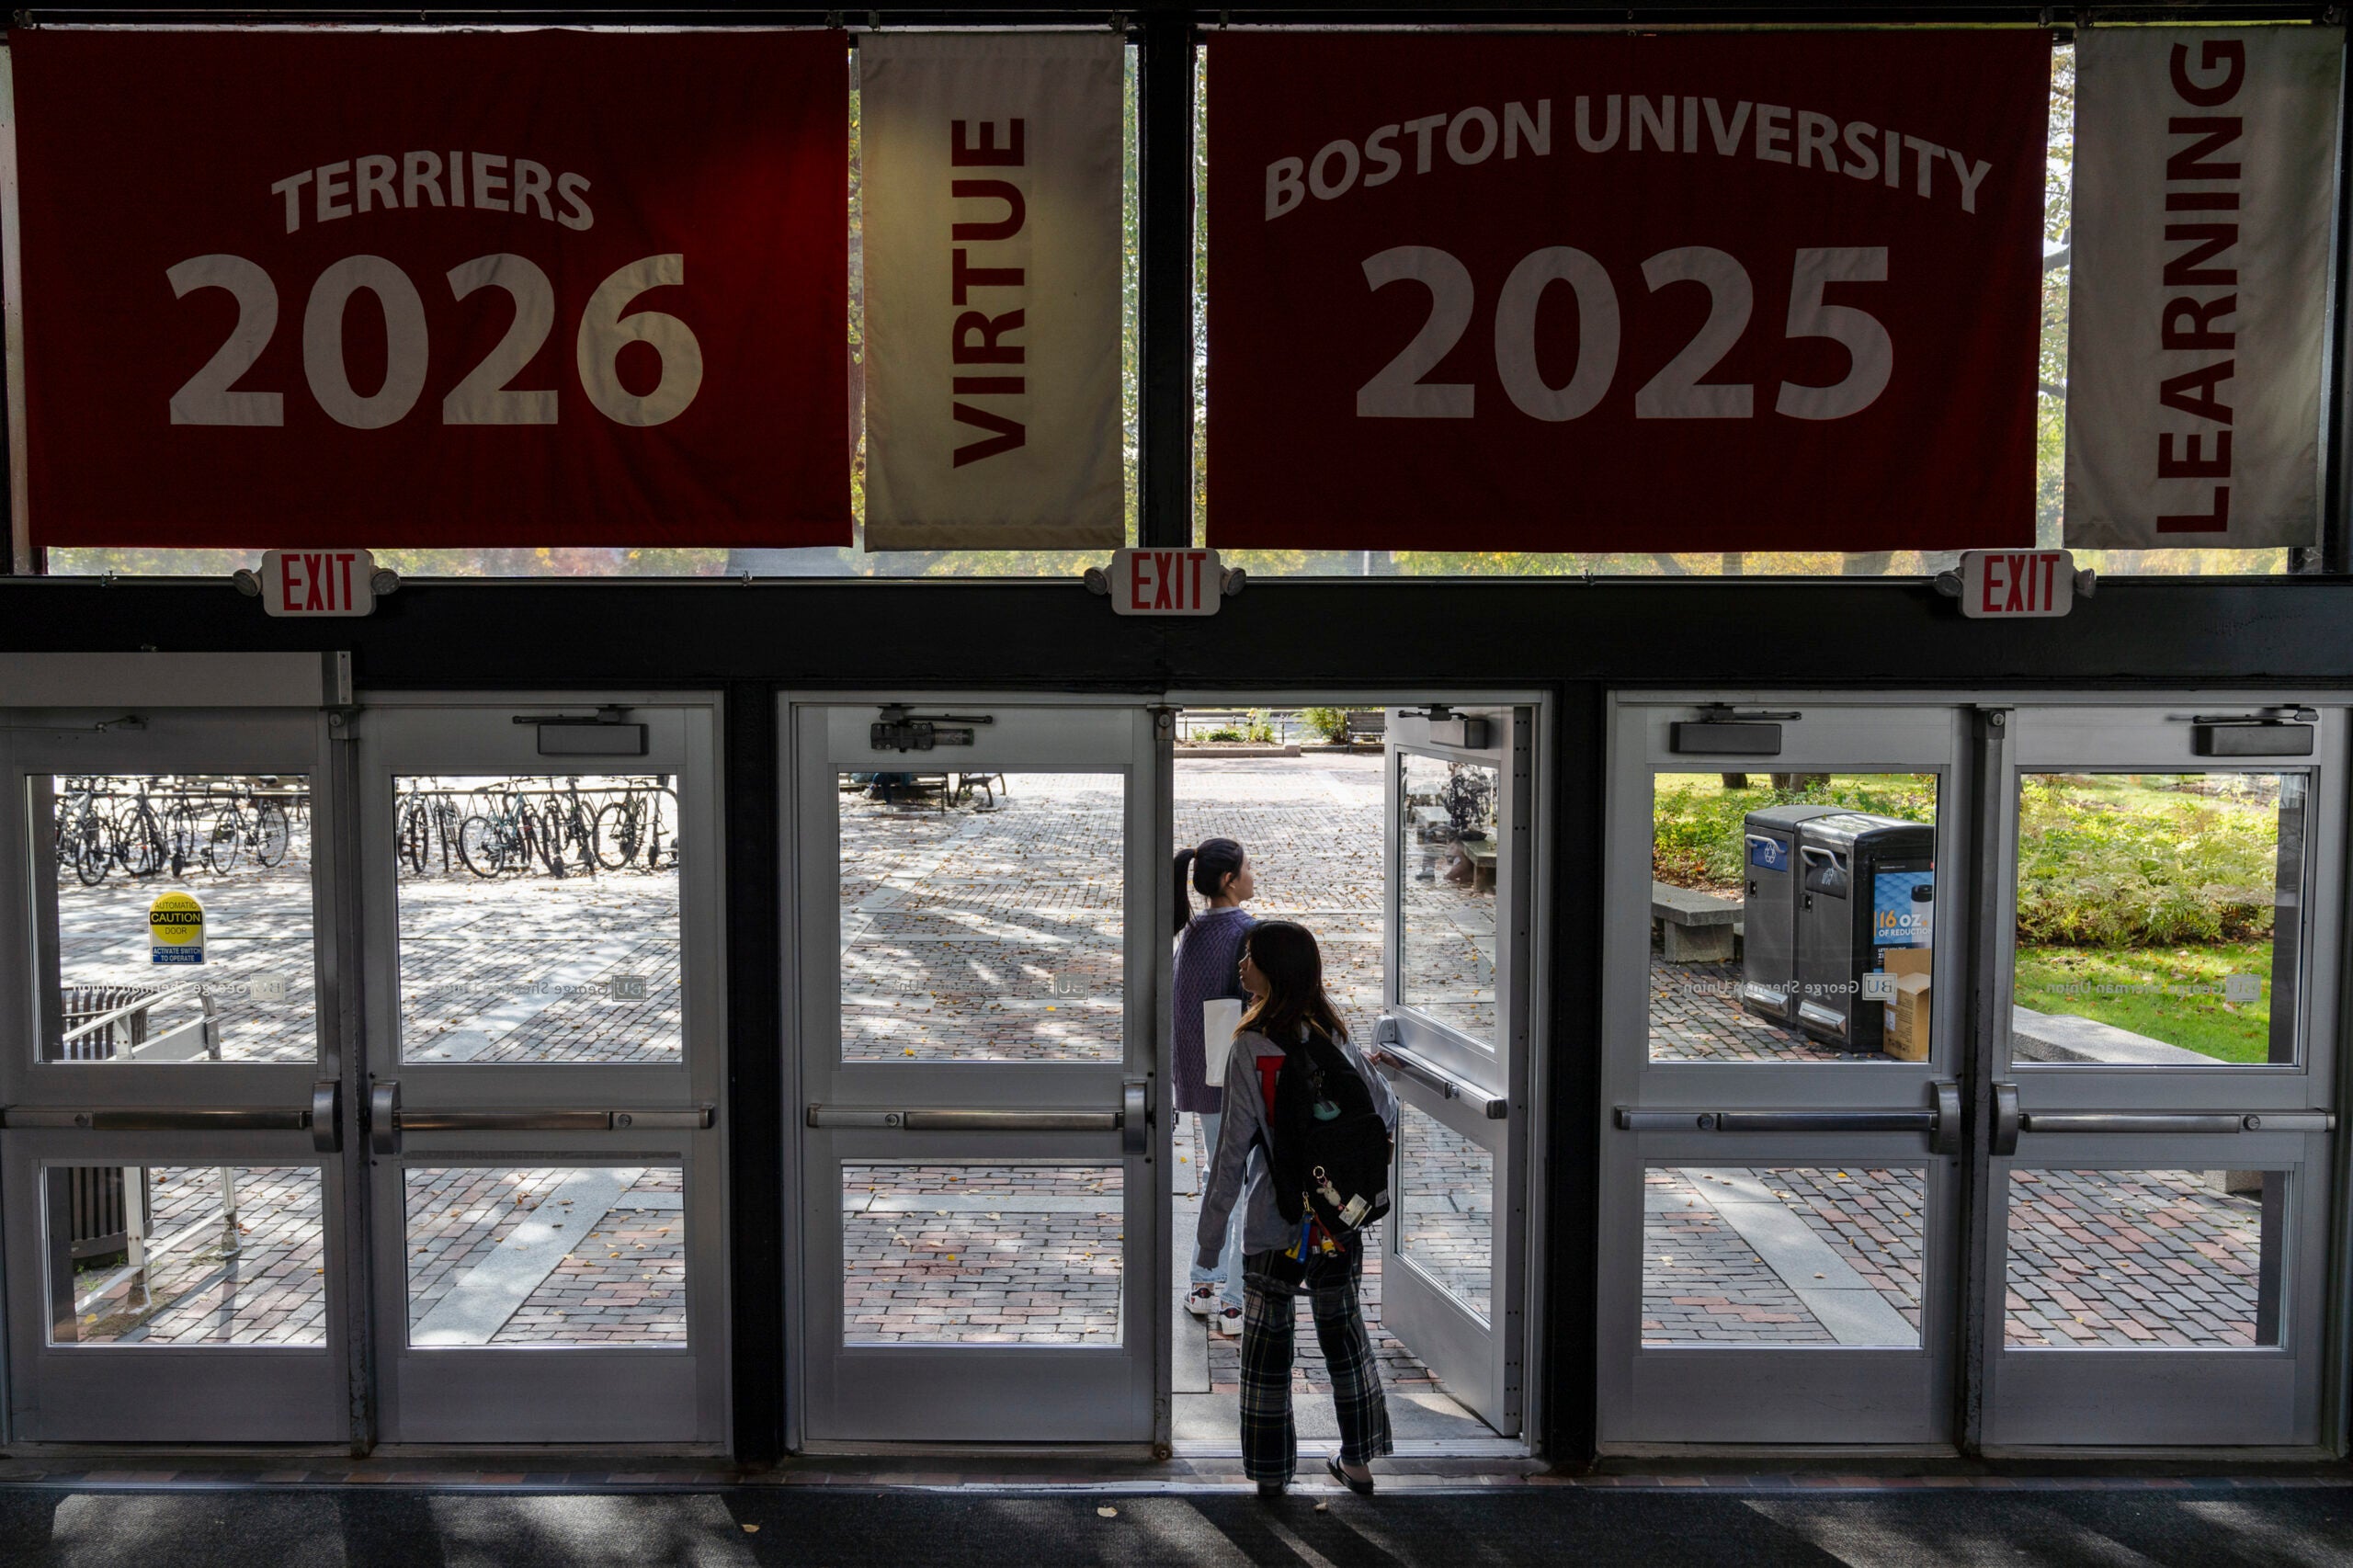 People leave the George Sherman Union at Boston University in Boston.